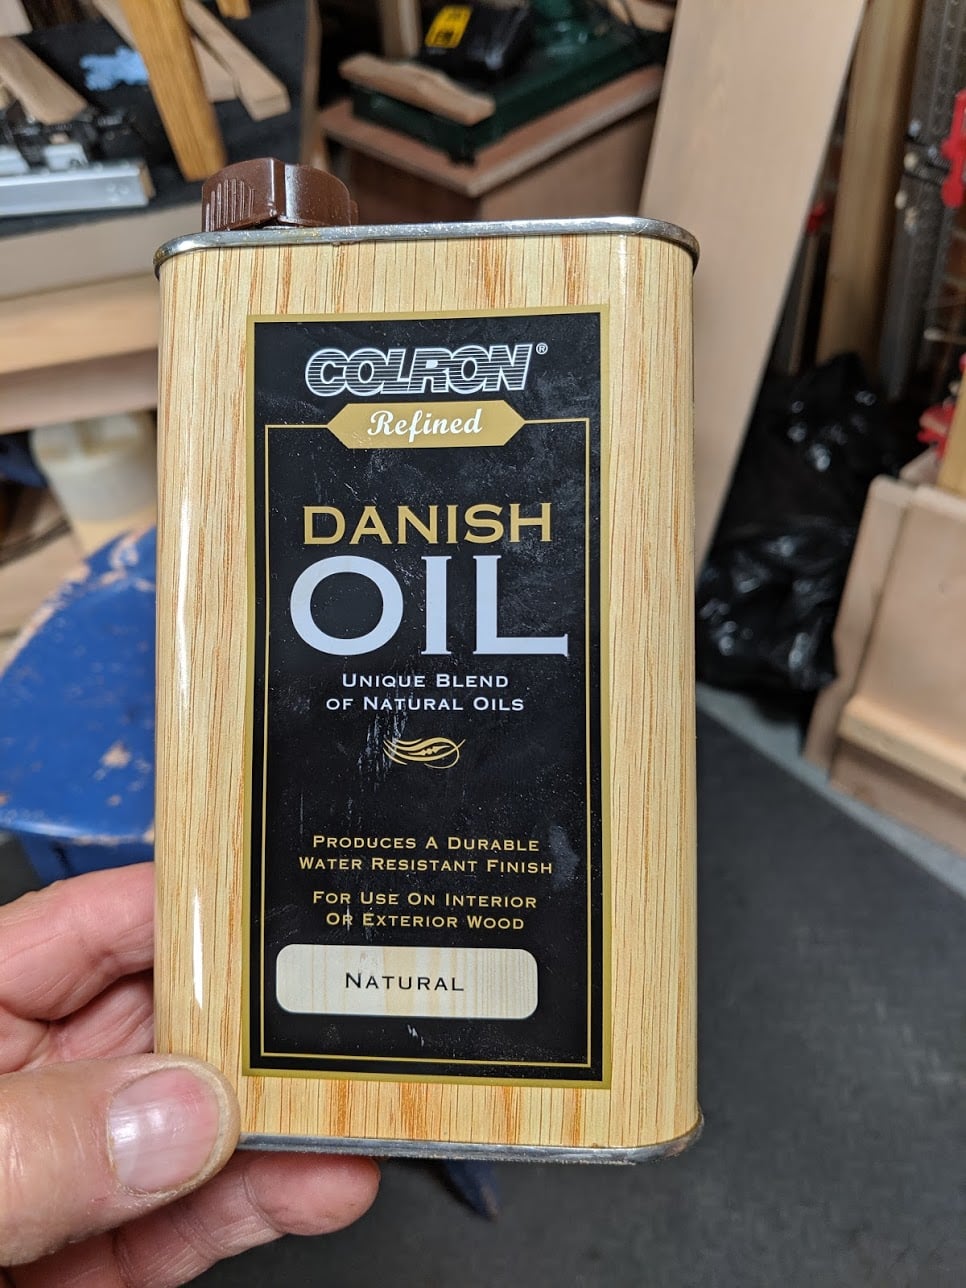 Boiled Linseed Oil Toxic? - Woodworking, Blog, Videos, Plans